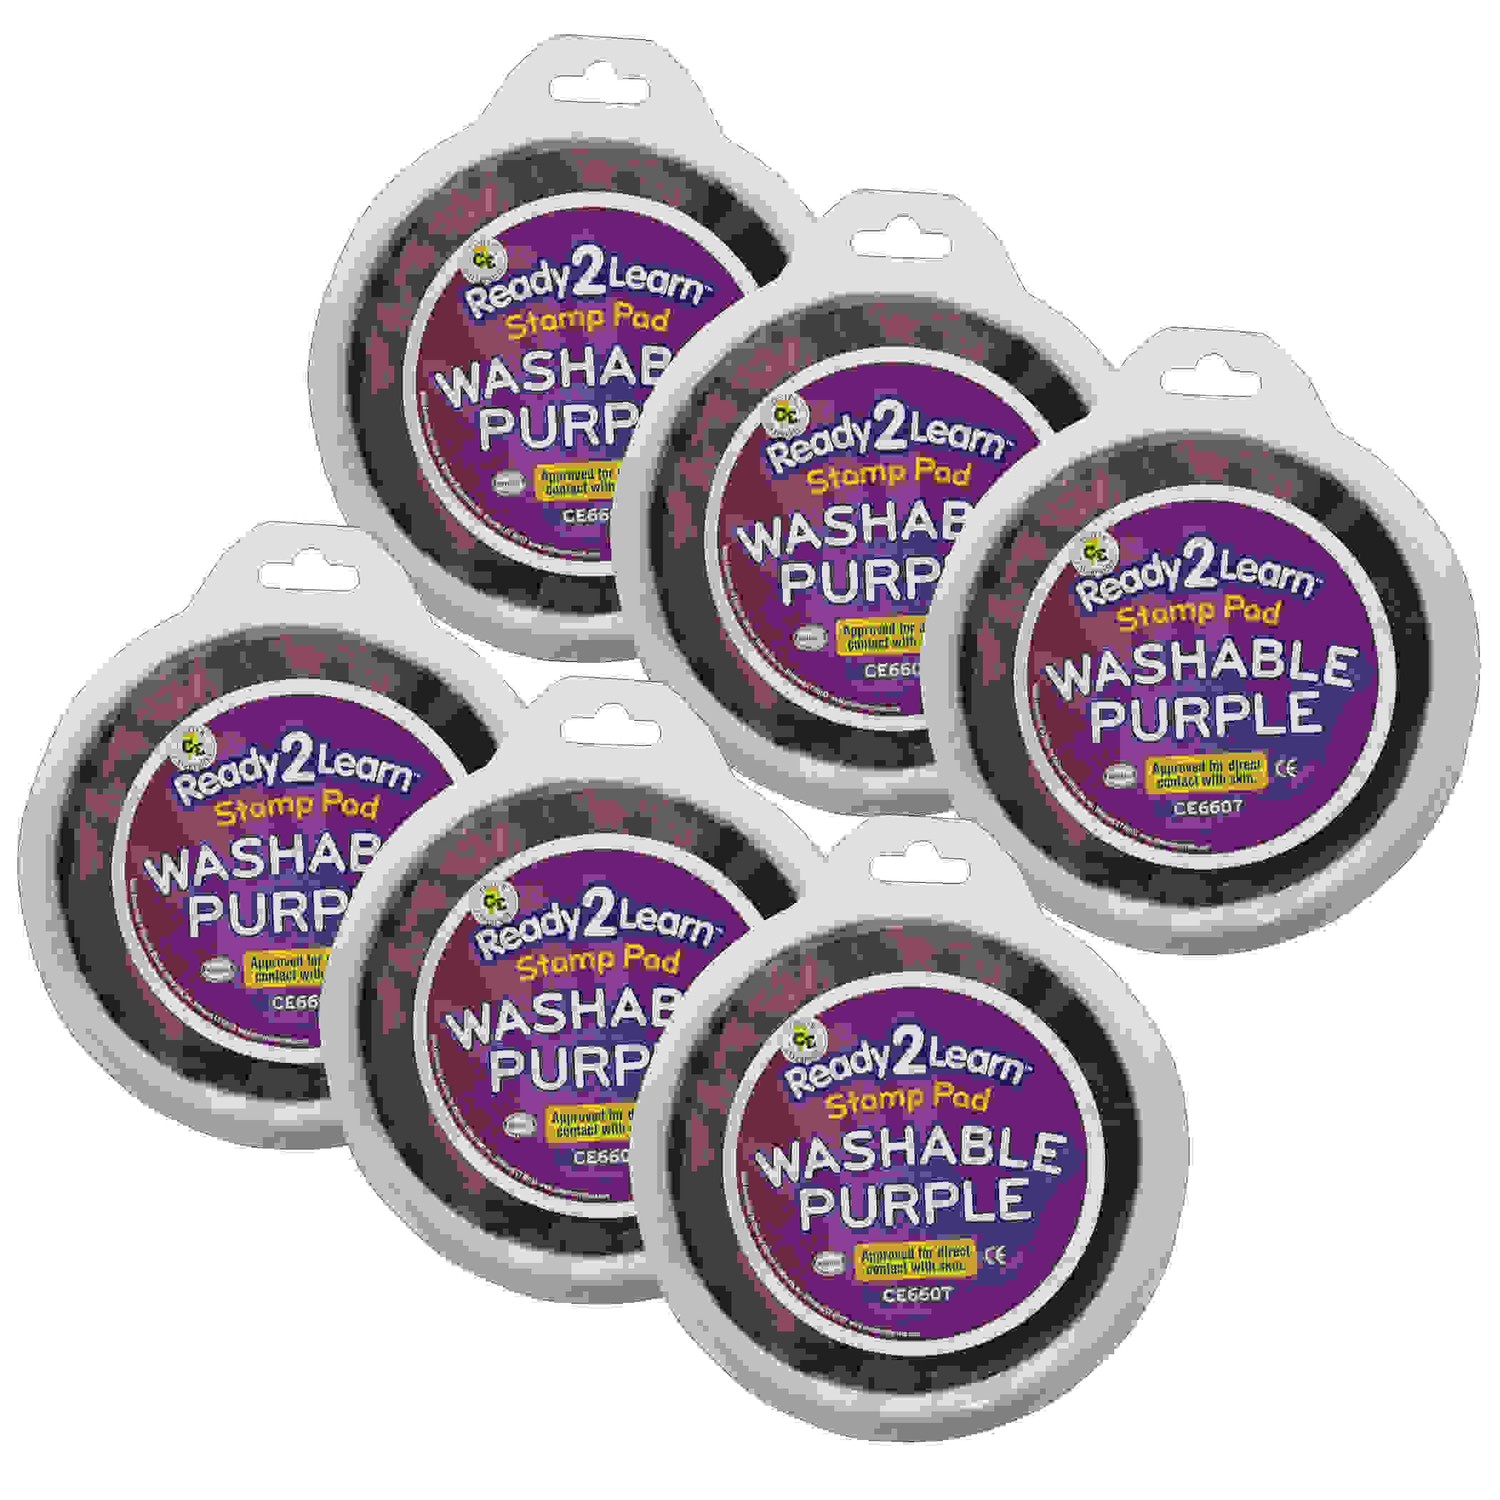 Ready2Learn Jumbo Washable Stamp Pad, Purple, Pack of 6